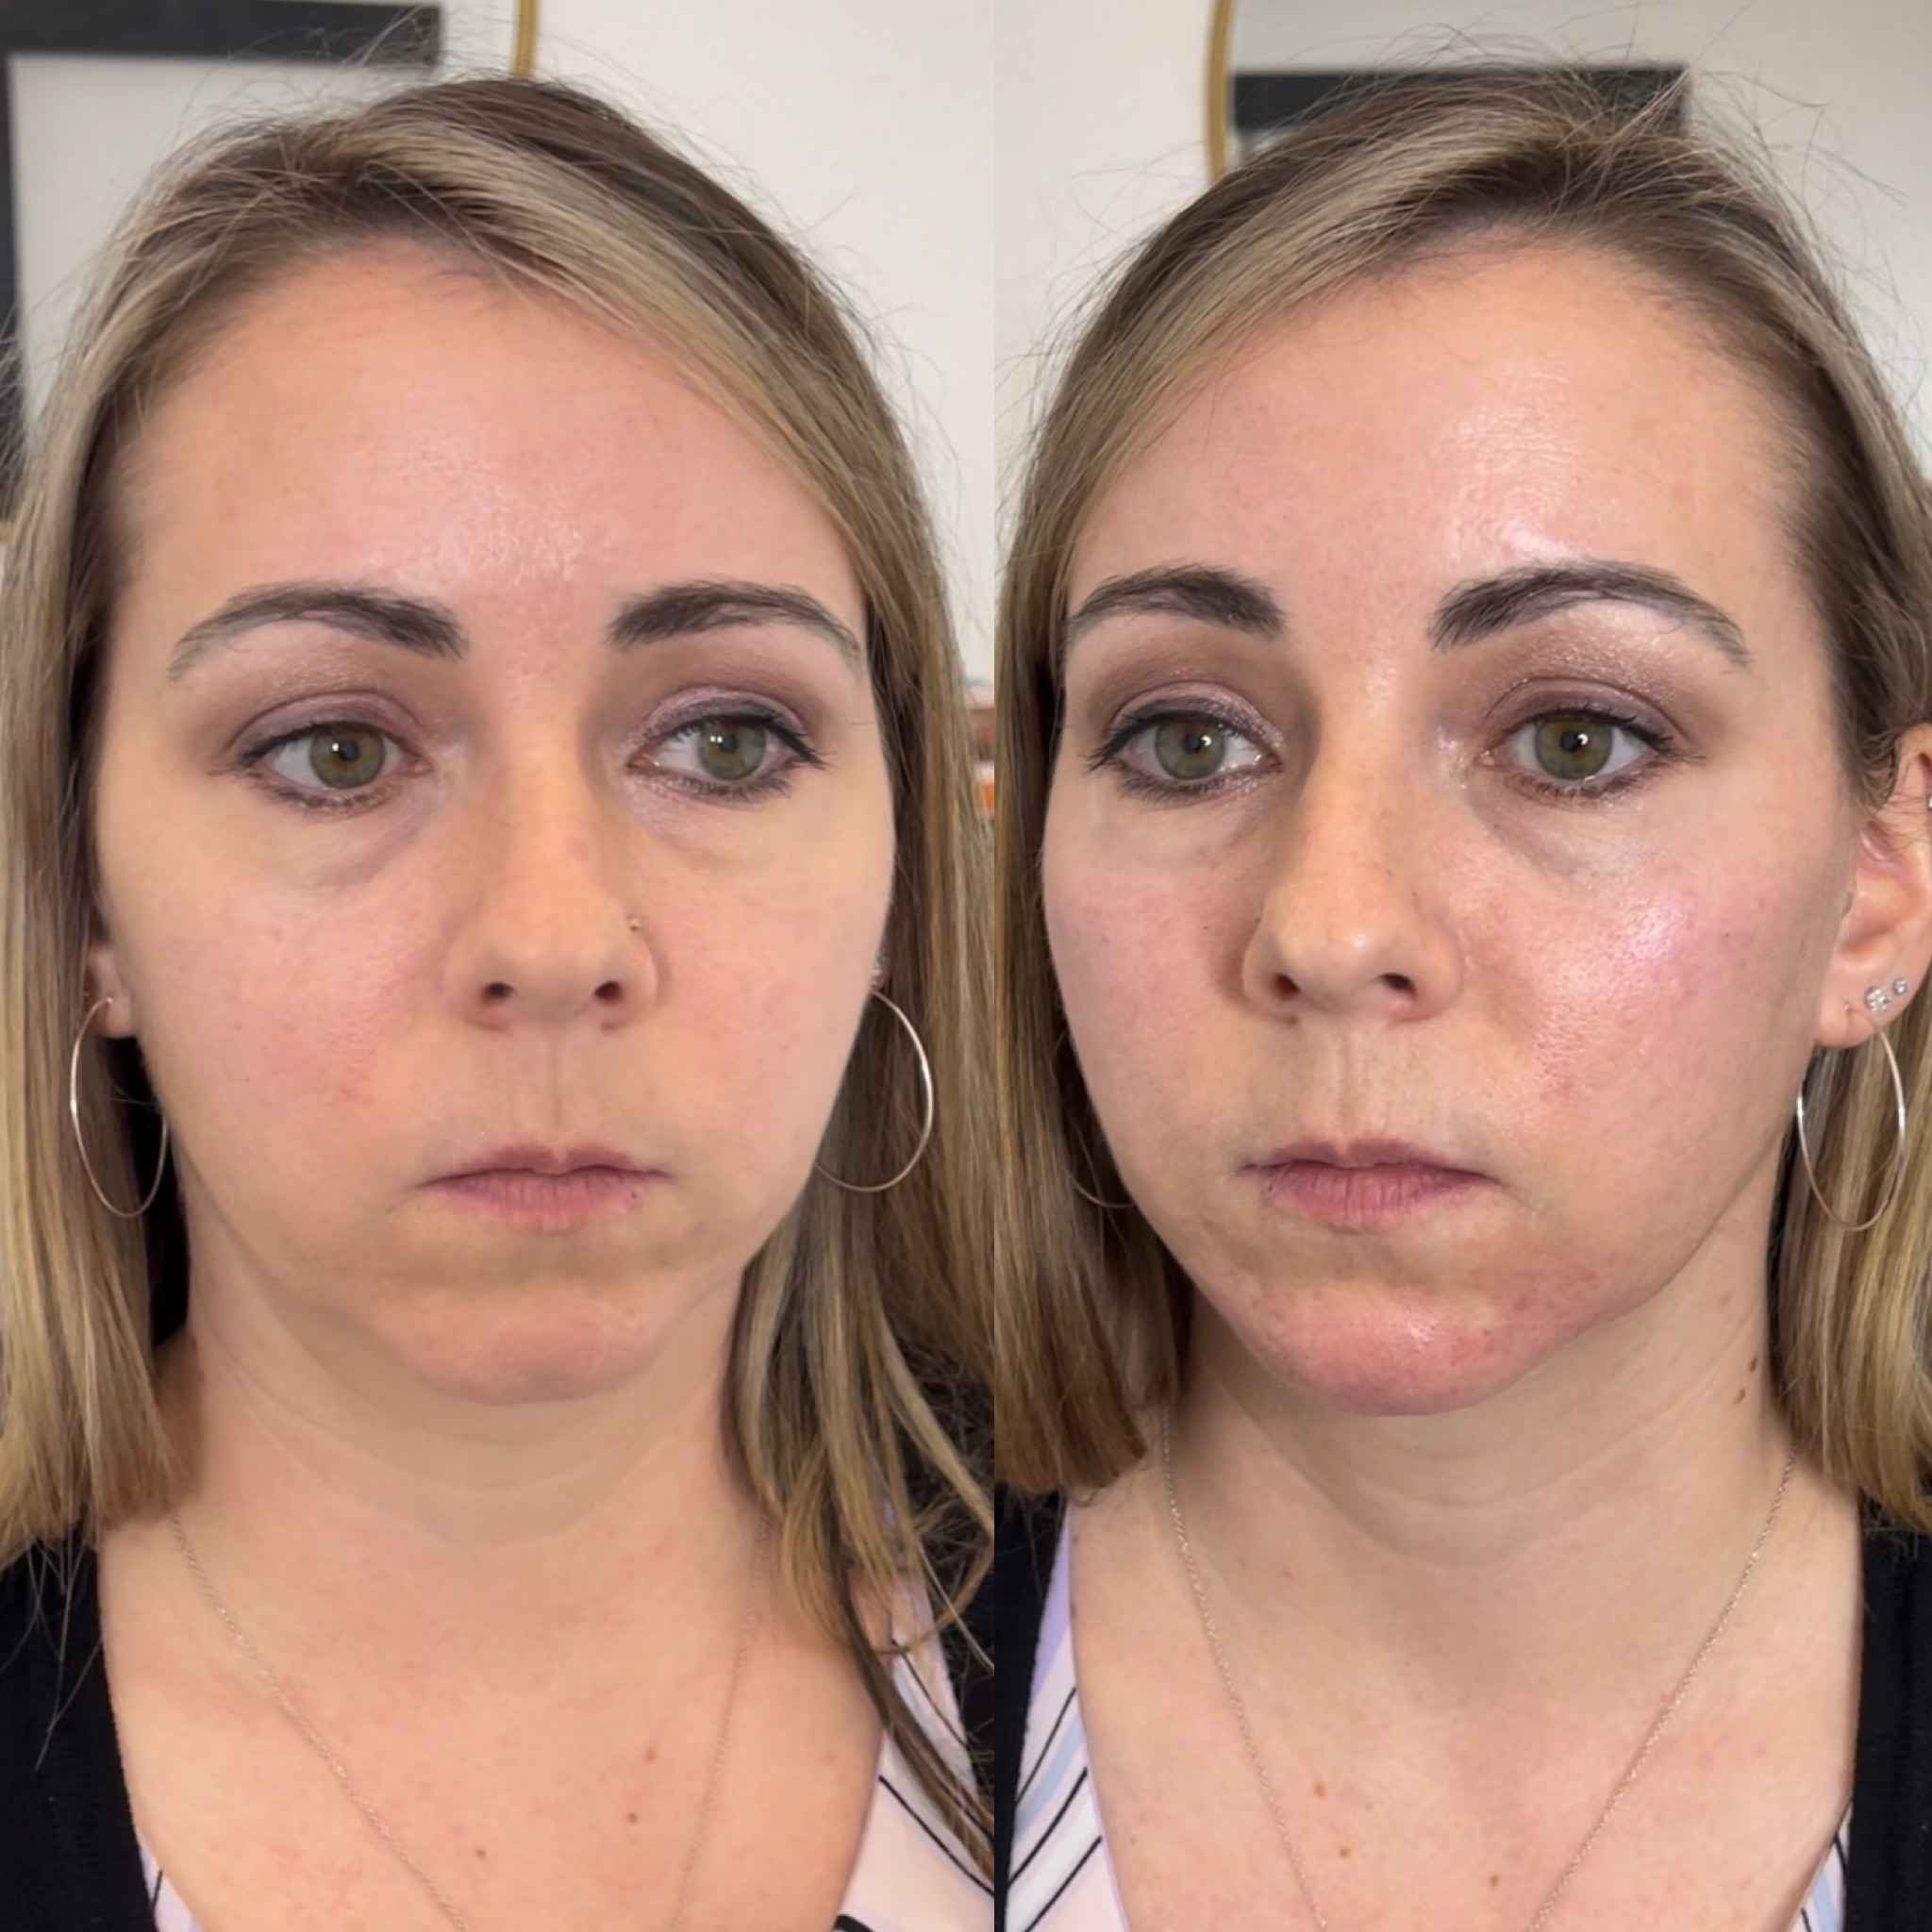 Before and After Cheek Filler Treatment | Onyx Medical Aesthetics | Homann Dr. S.E. suite B Lacey, WA